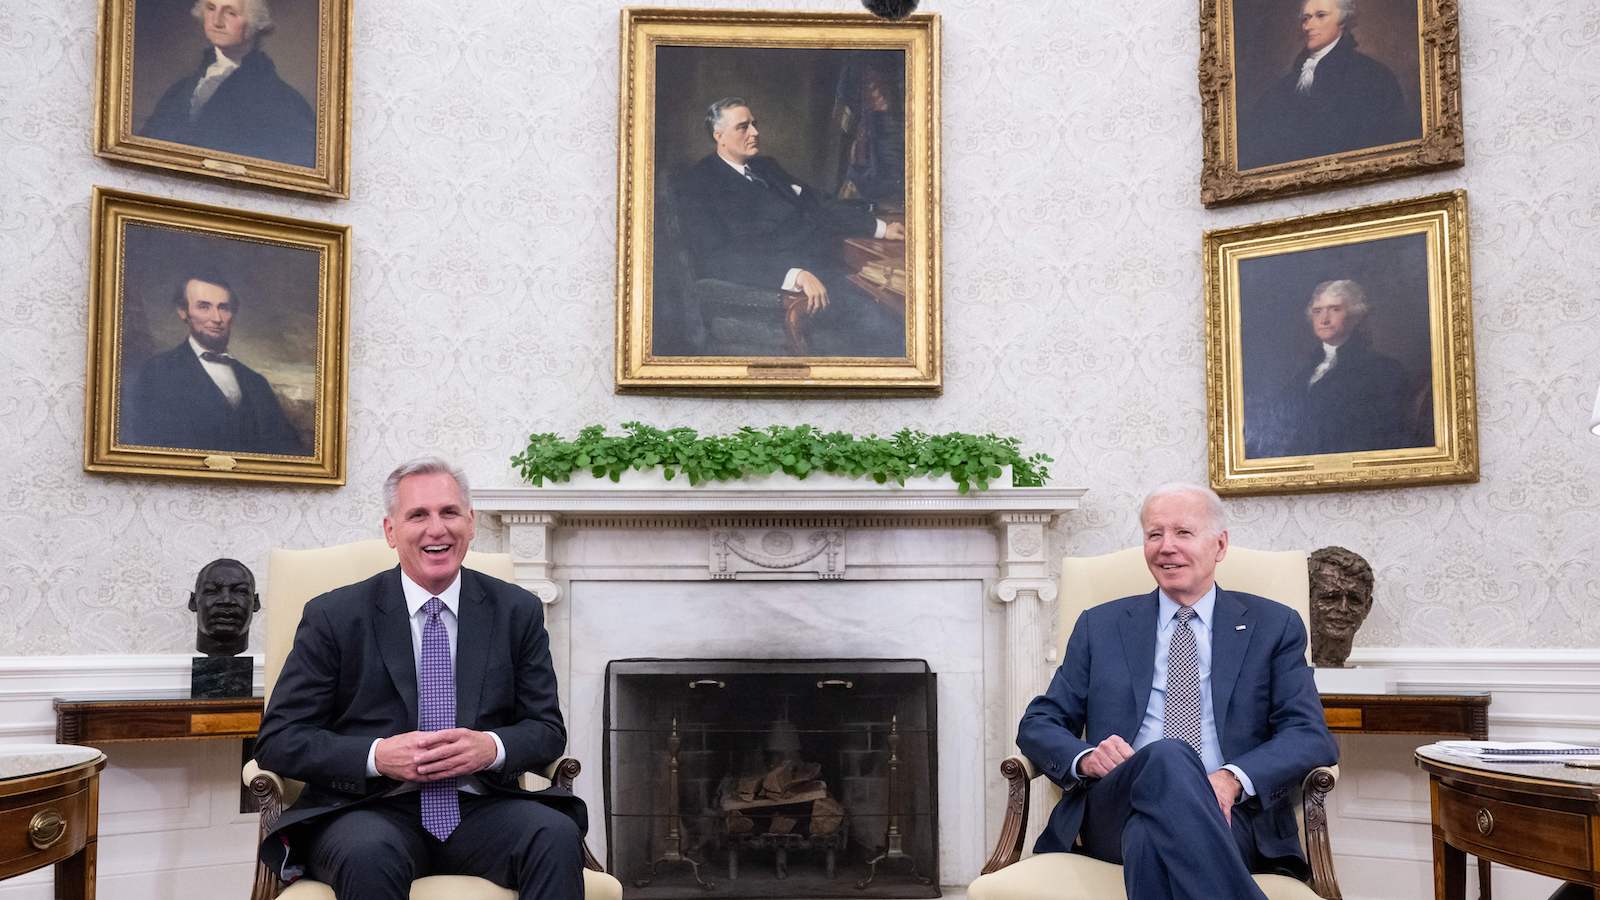 McCarthy and Biden seated with portraits in the background